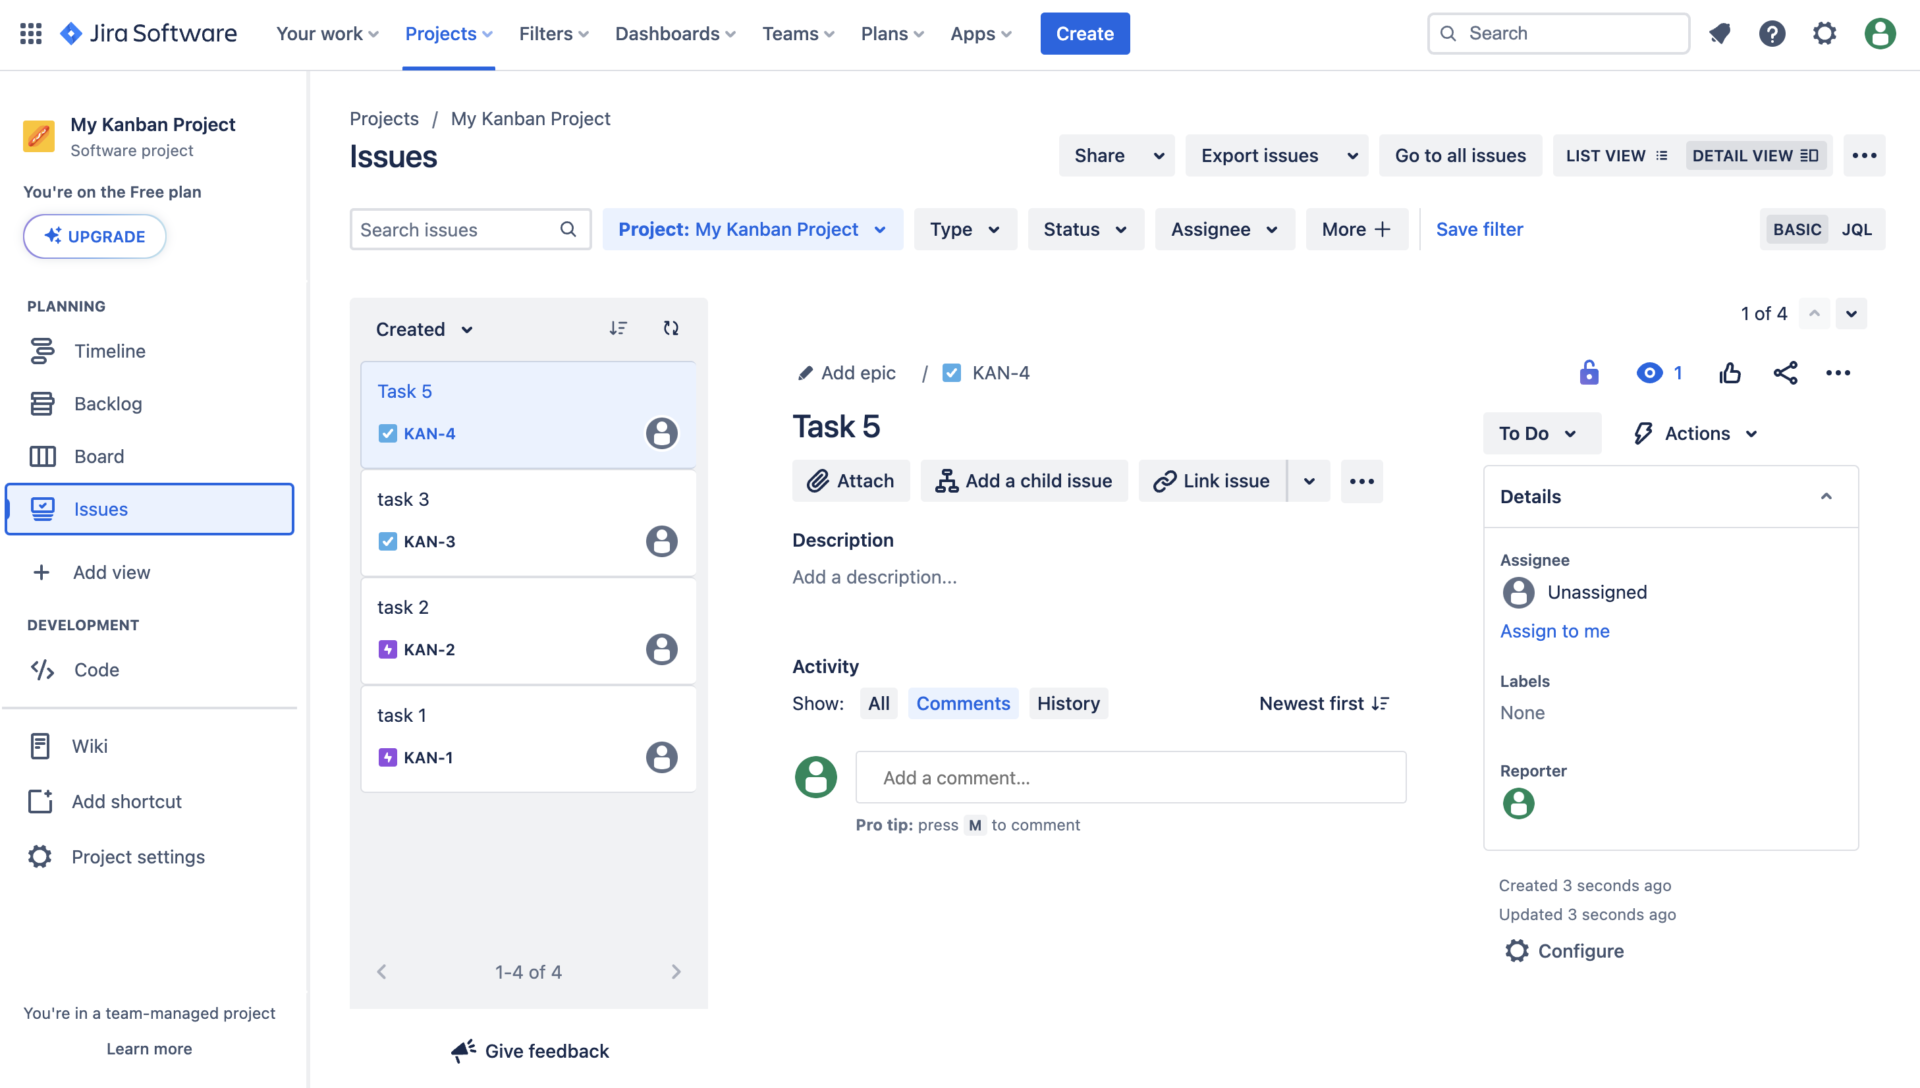 Top page of Jira Software